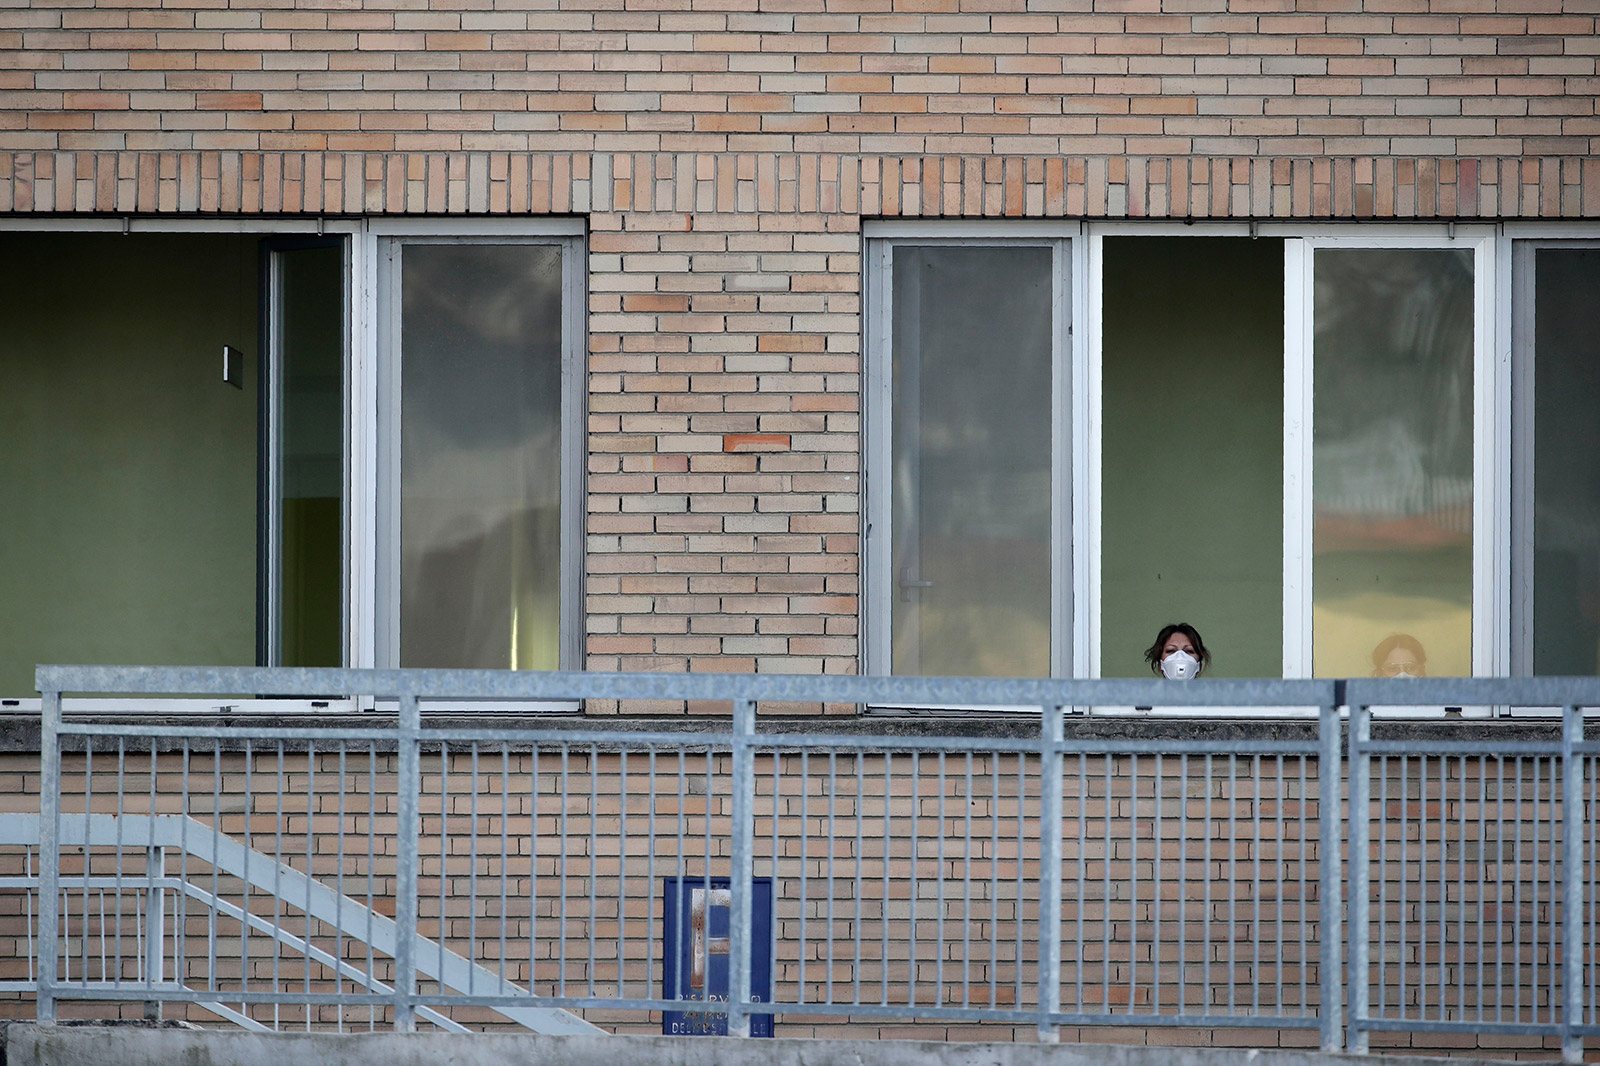 A nurse looks out the window of a hospital in Codogno on Friday.